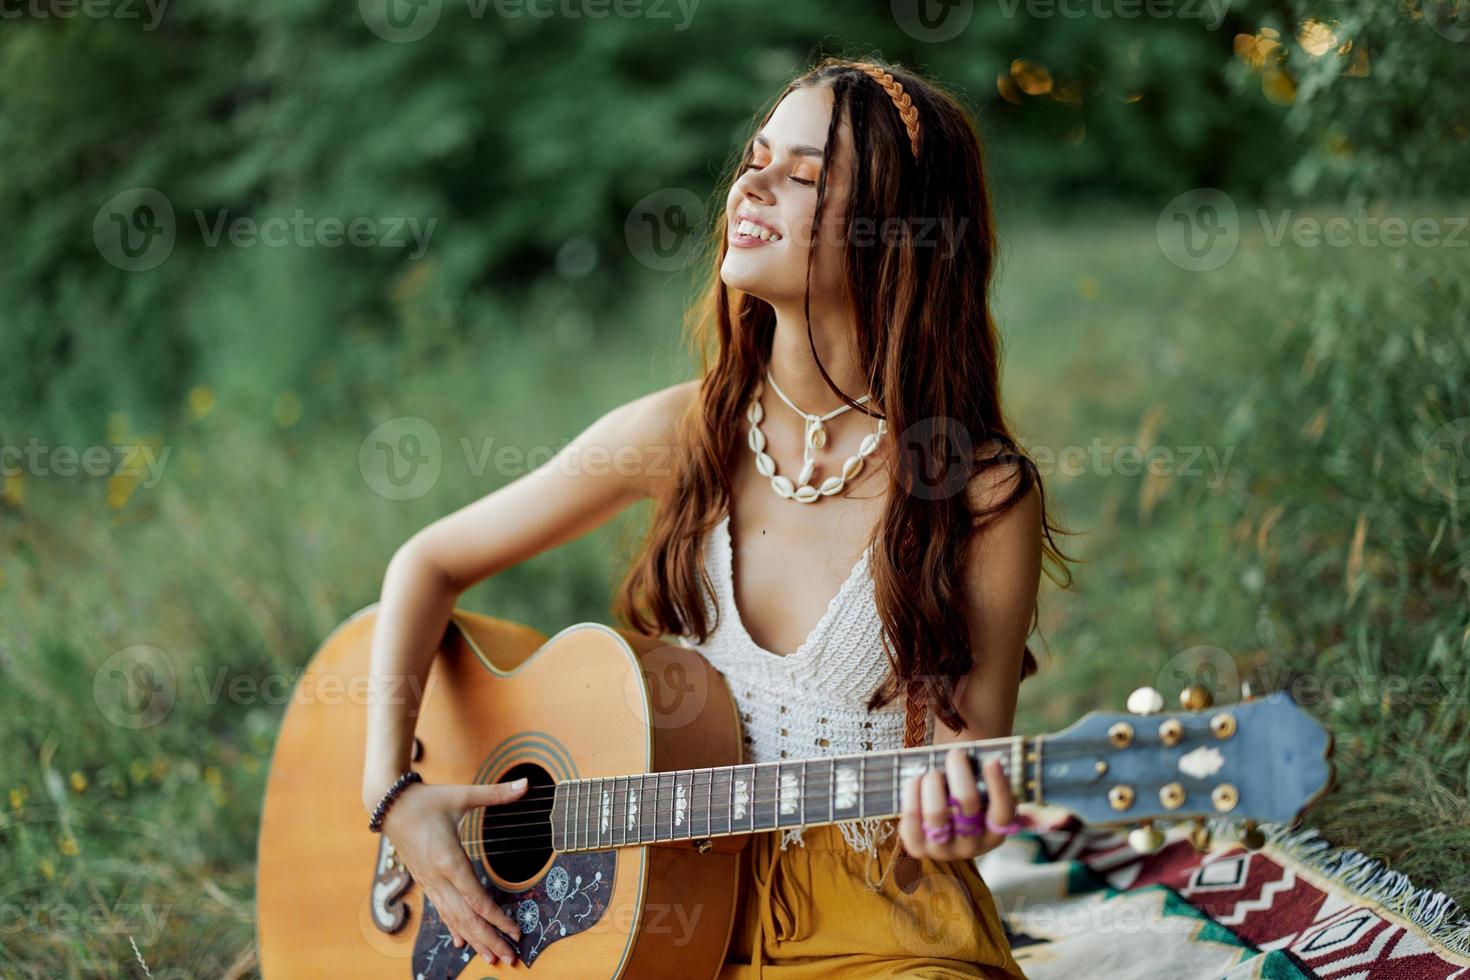 Hippie woman smiling and hugging her guitar in nature in the park in the sunset light in eco-clothing photo